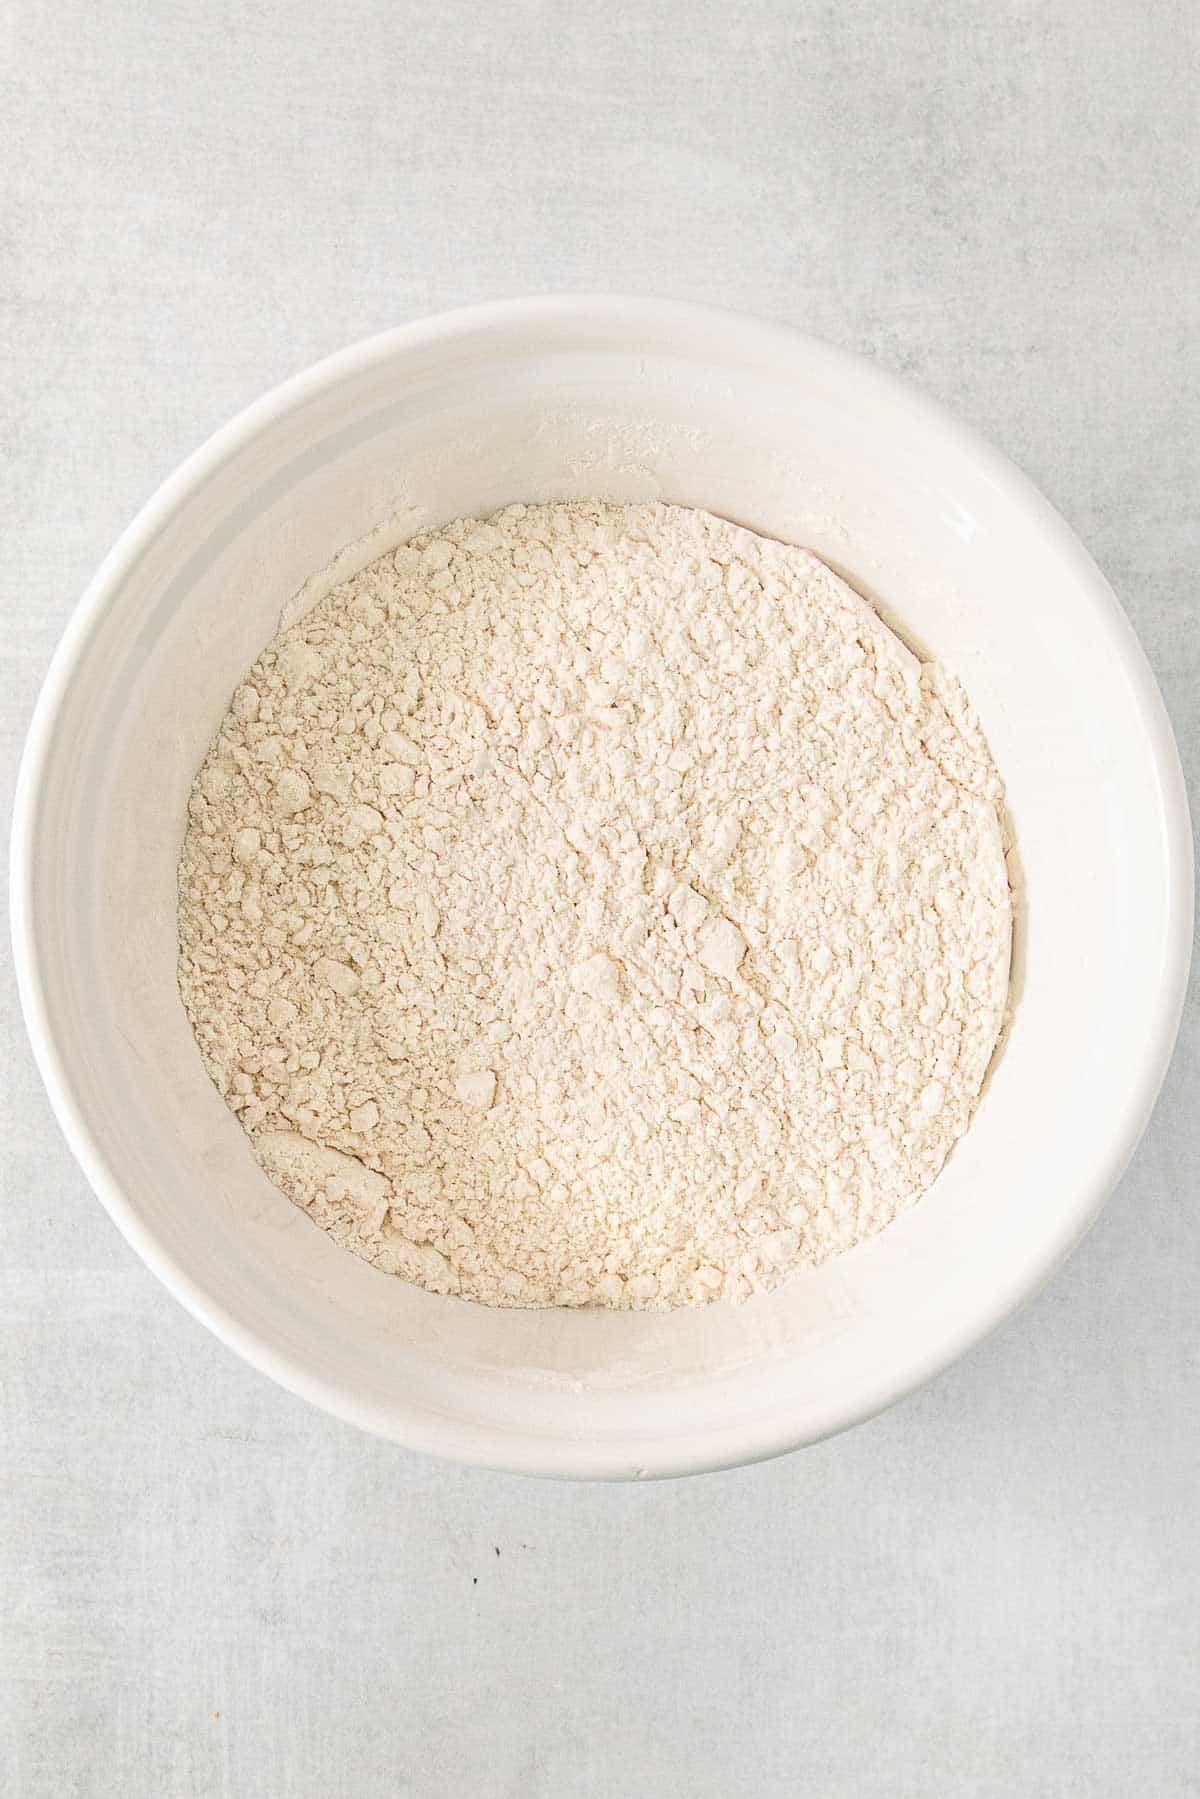 Flour in a white bowl on a white surface.